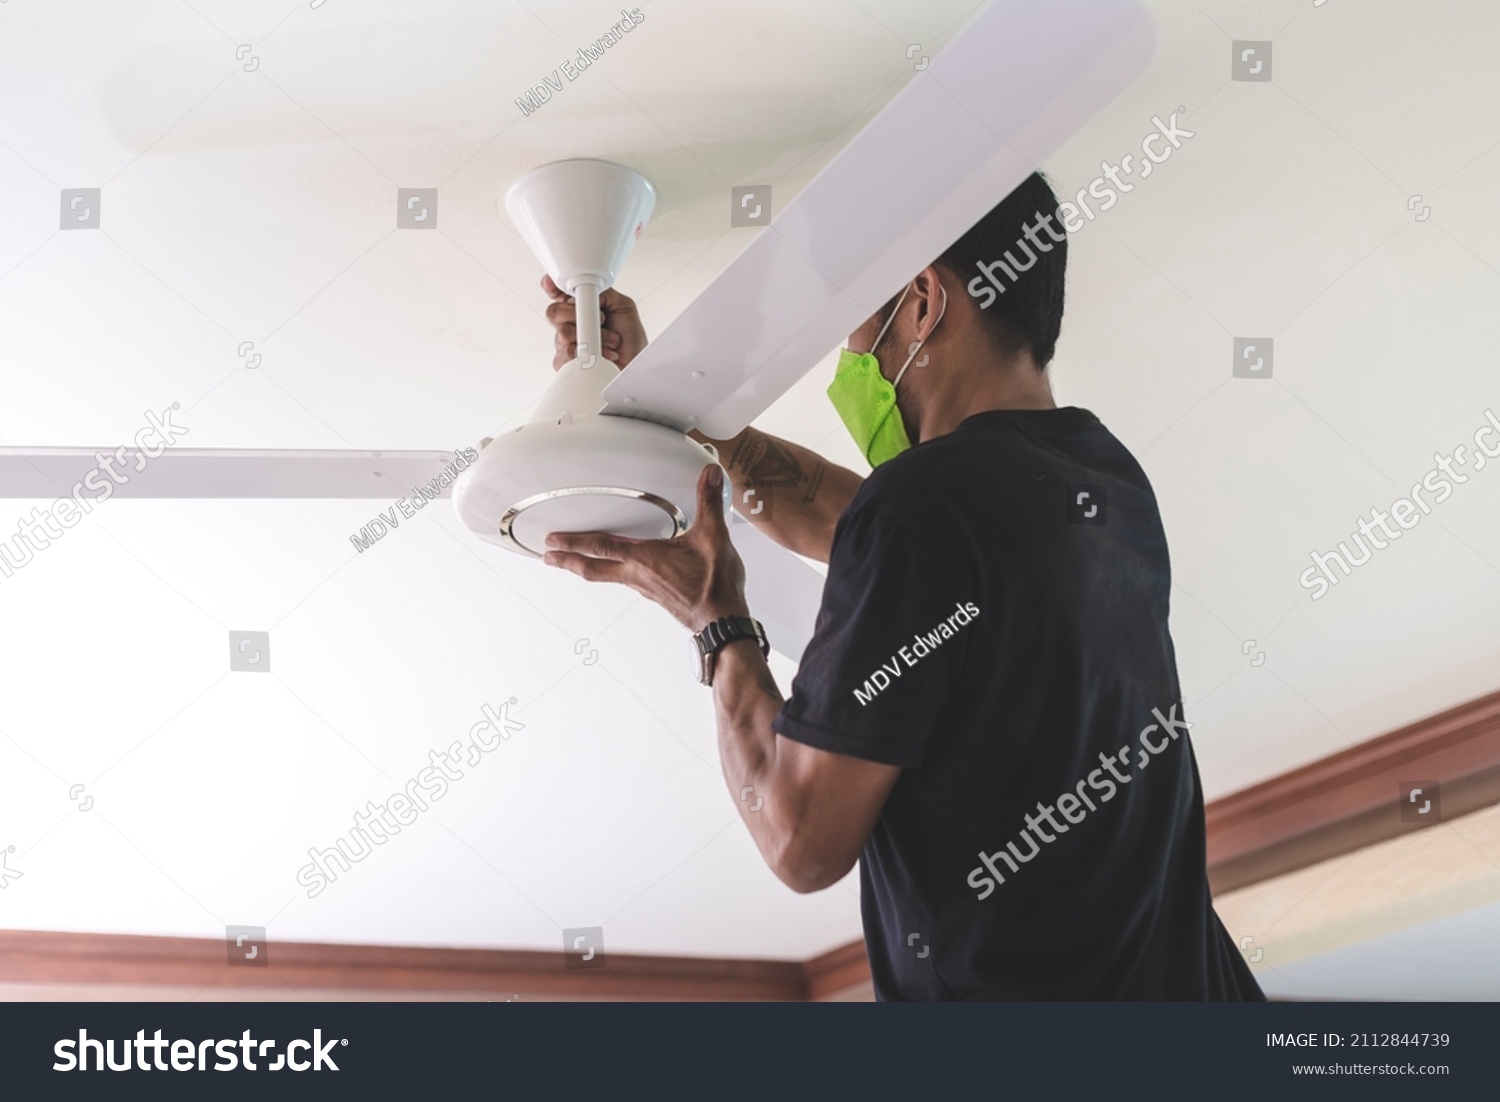 A handyman installs a ceiling fan, tightening the screws of the fan blades. At the living room. Home renovation or construction. #2112844739